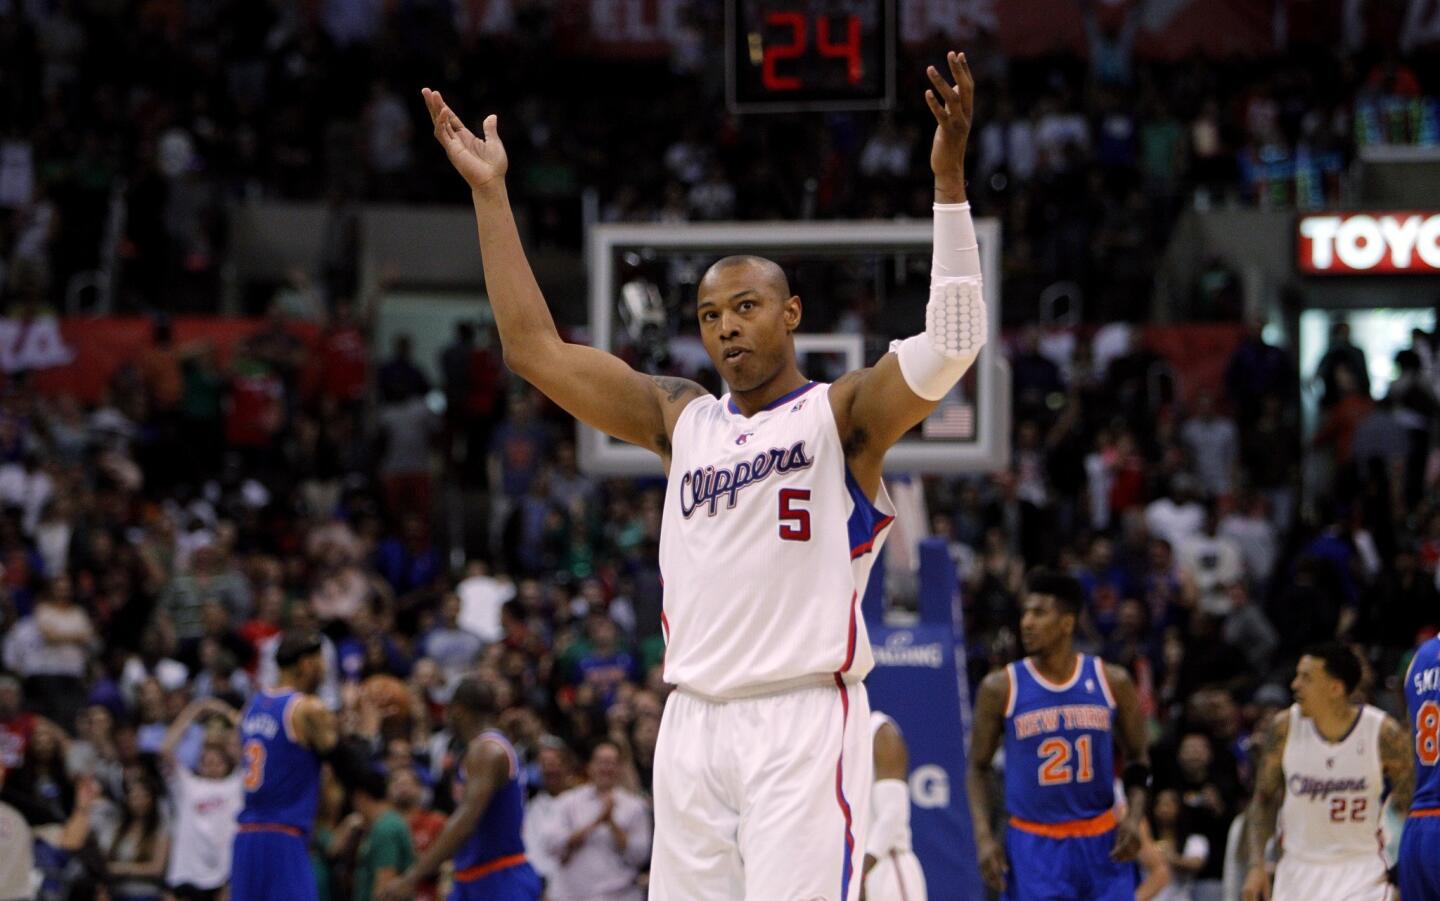 Clippers forward Caron Butler reacts after his three-point shot sealed the victory over the Knicks on Sunday afternoon at Staples Center.